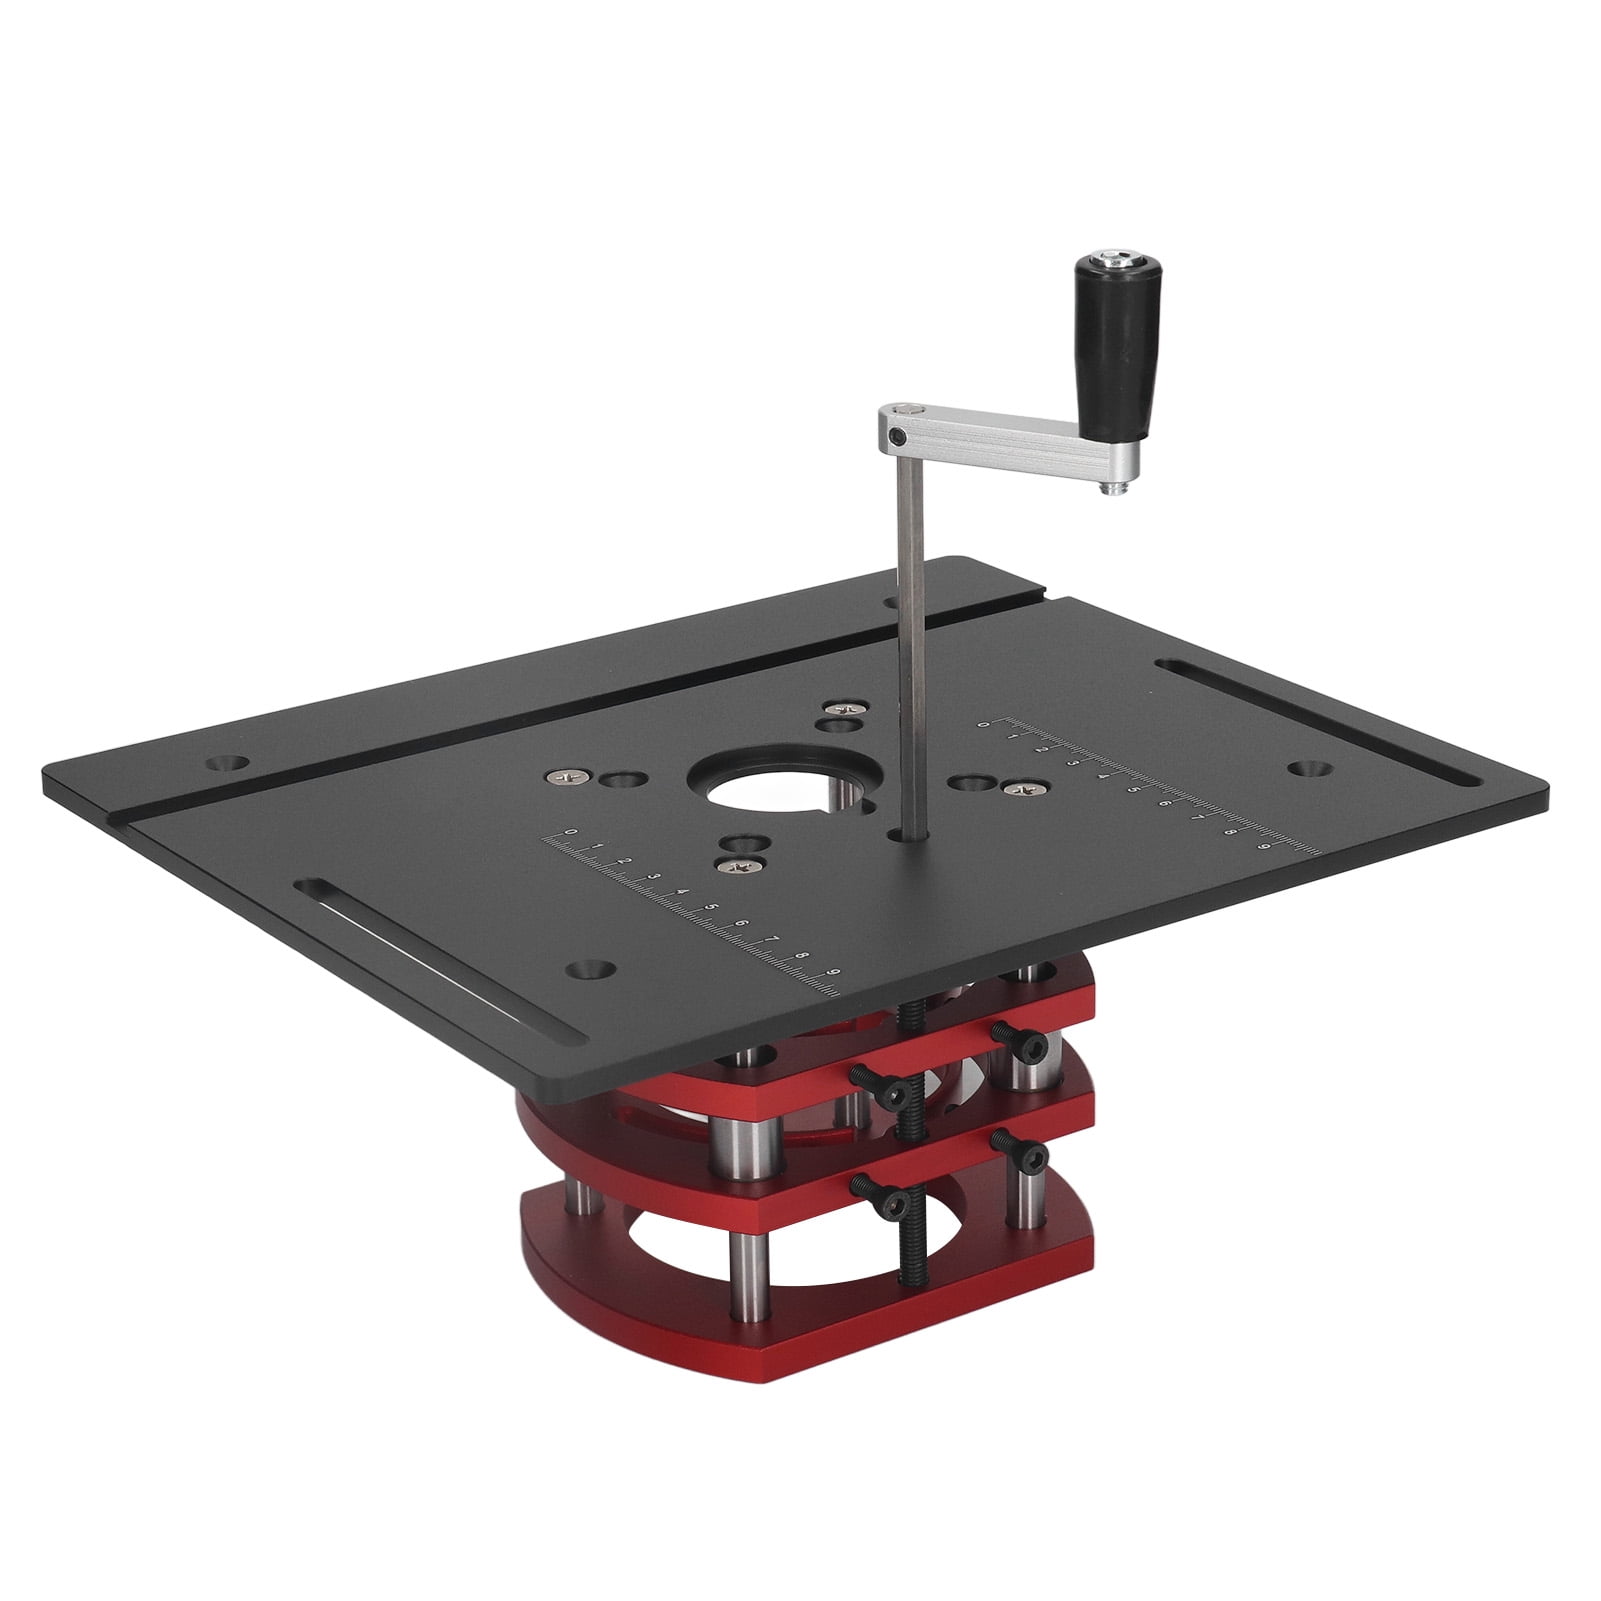 Router Lift System, Router Table Lfit Manual Lifting Aluminum Alloy  Stainless Steel For Woodworking Black